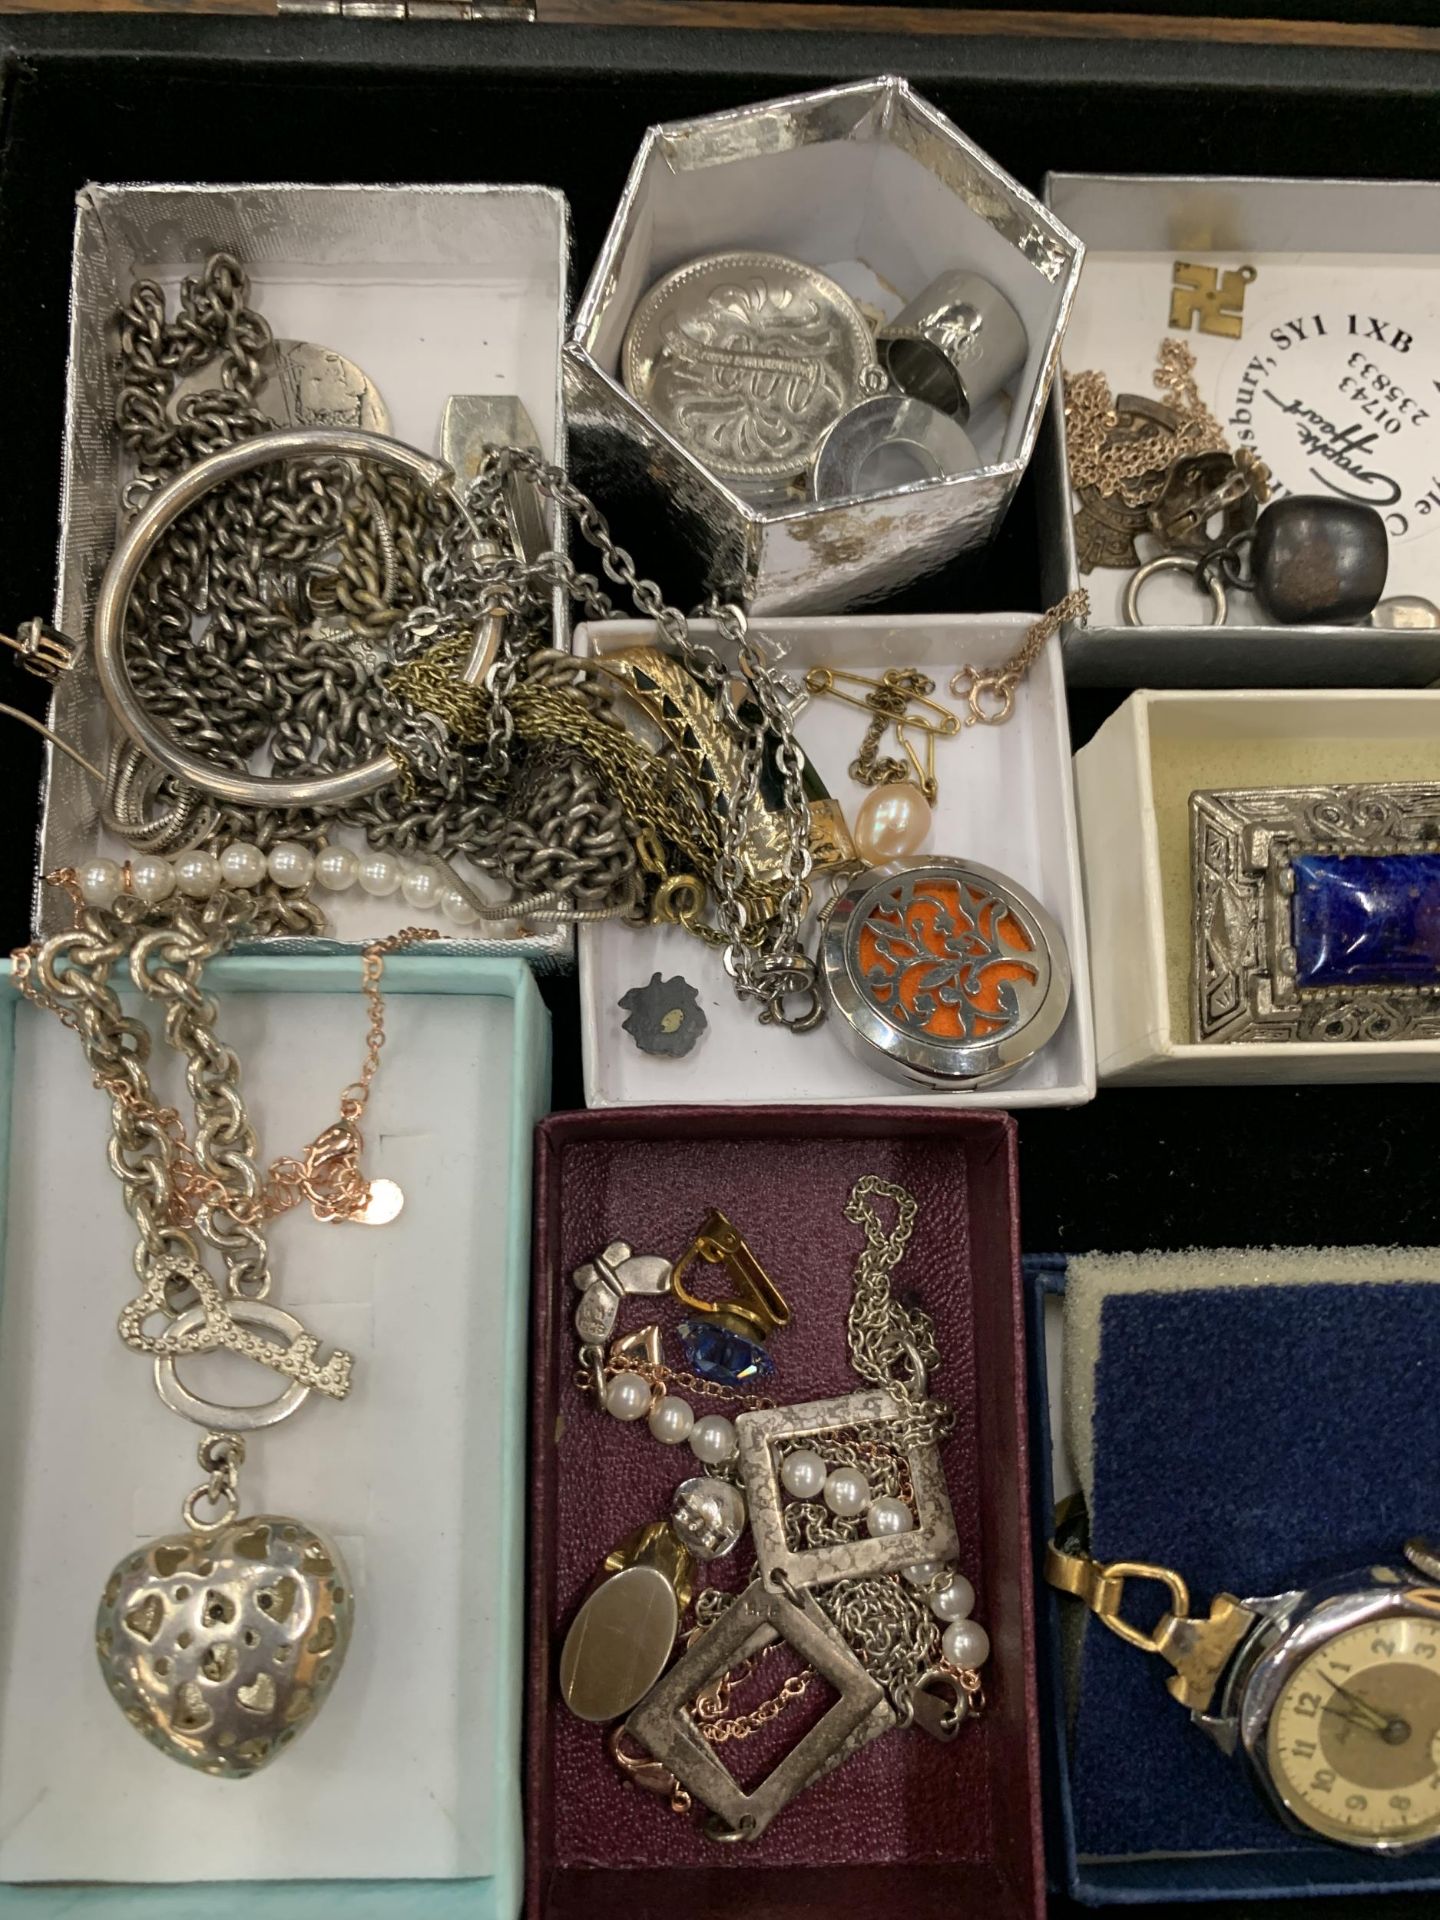 A GLASS TOPPED JEWELLERY DISPLAY BOX WITH CONTENTS - Image 3 of 4